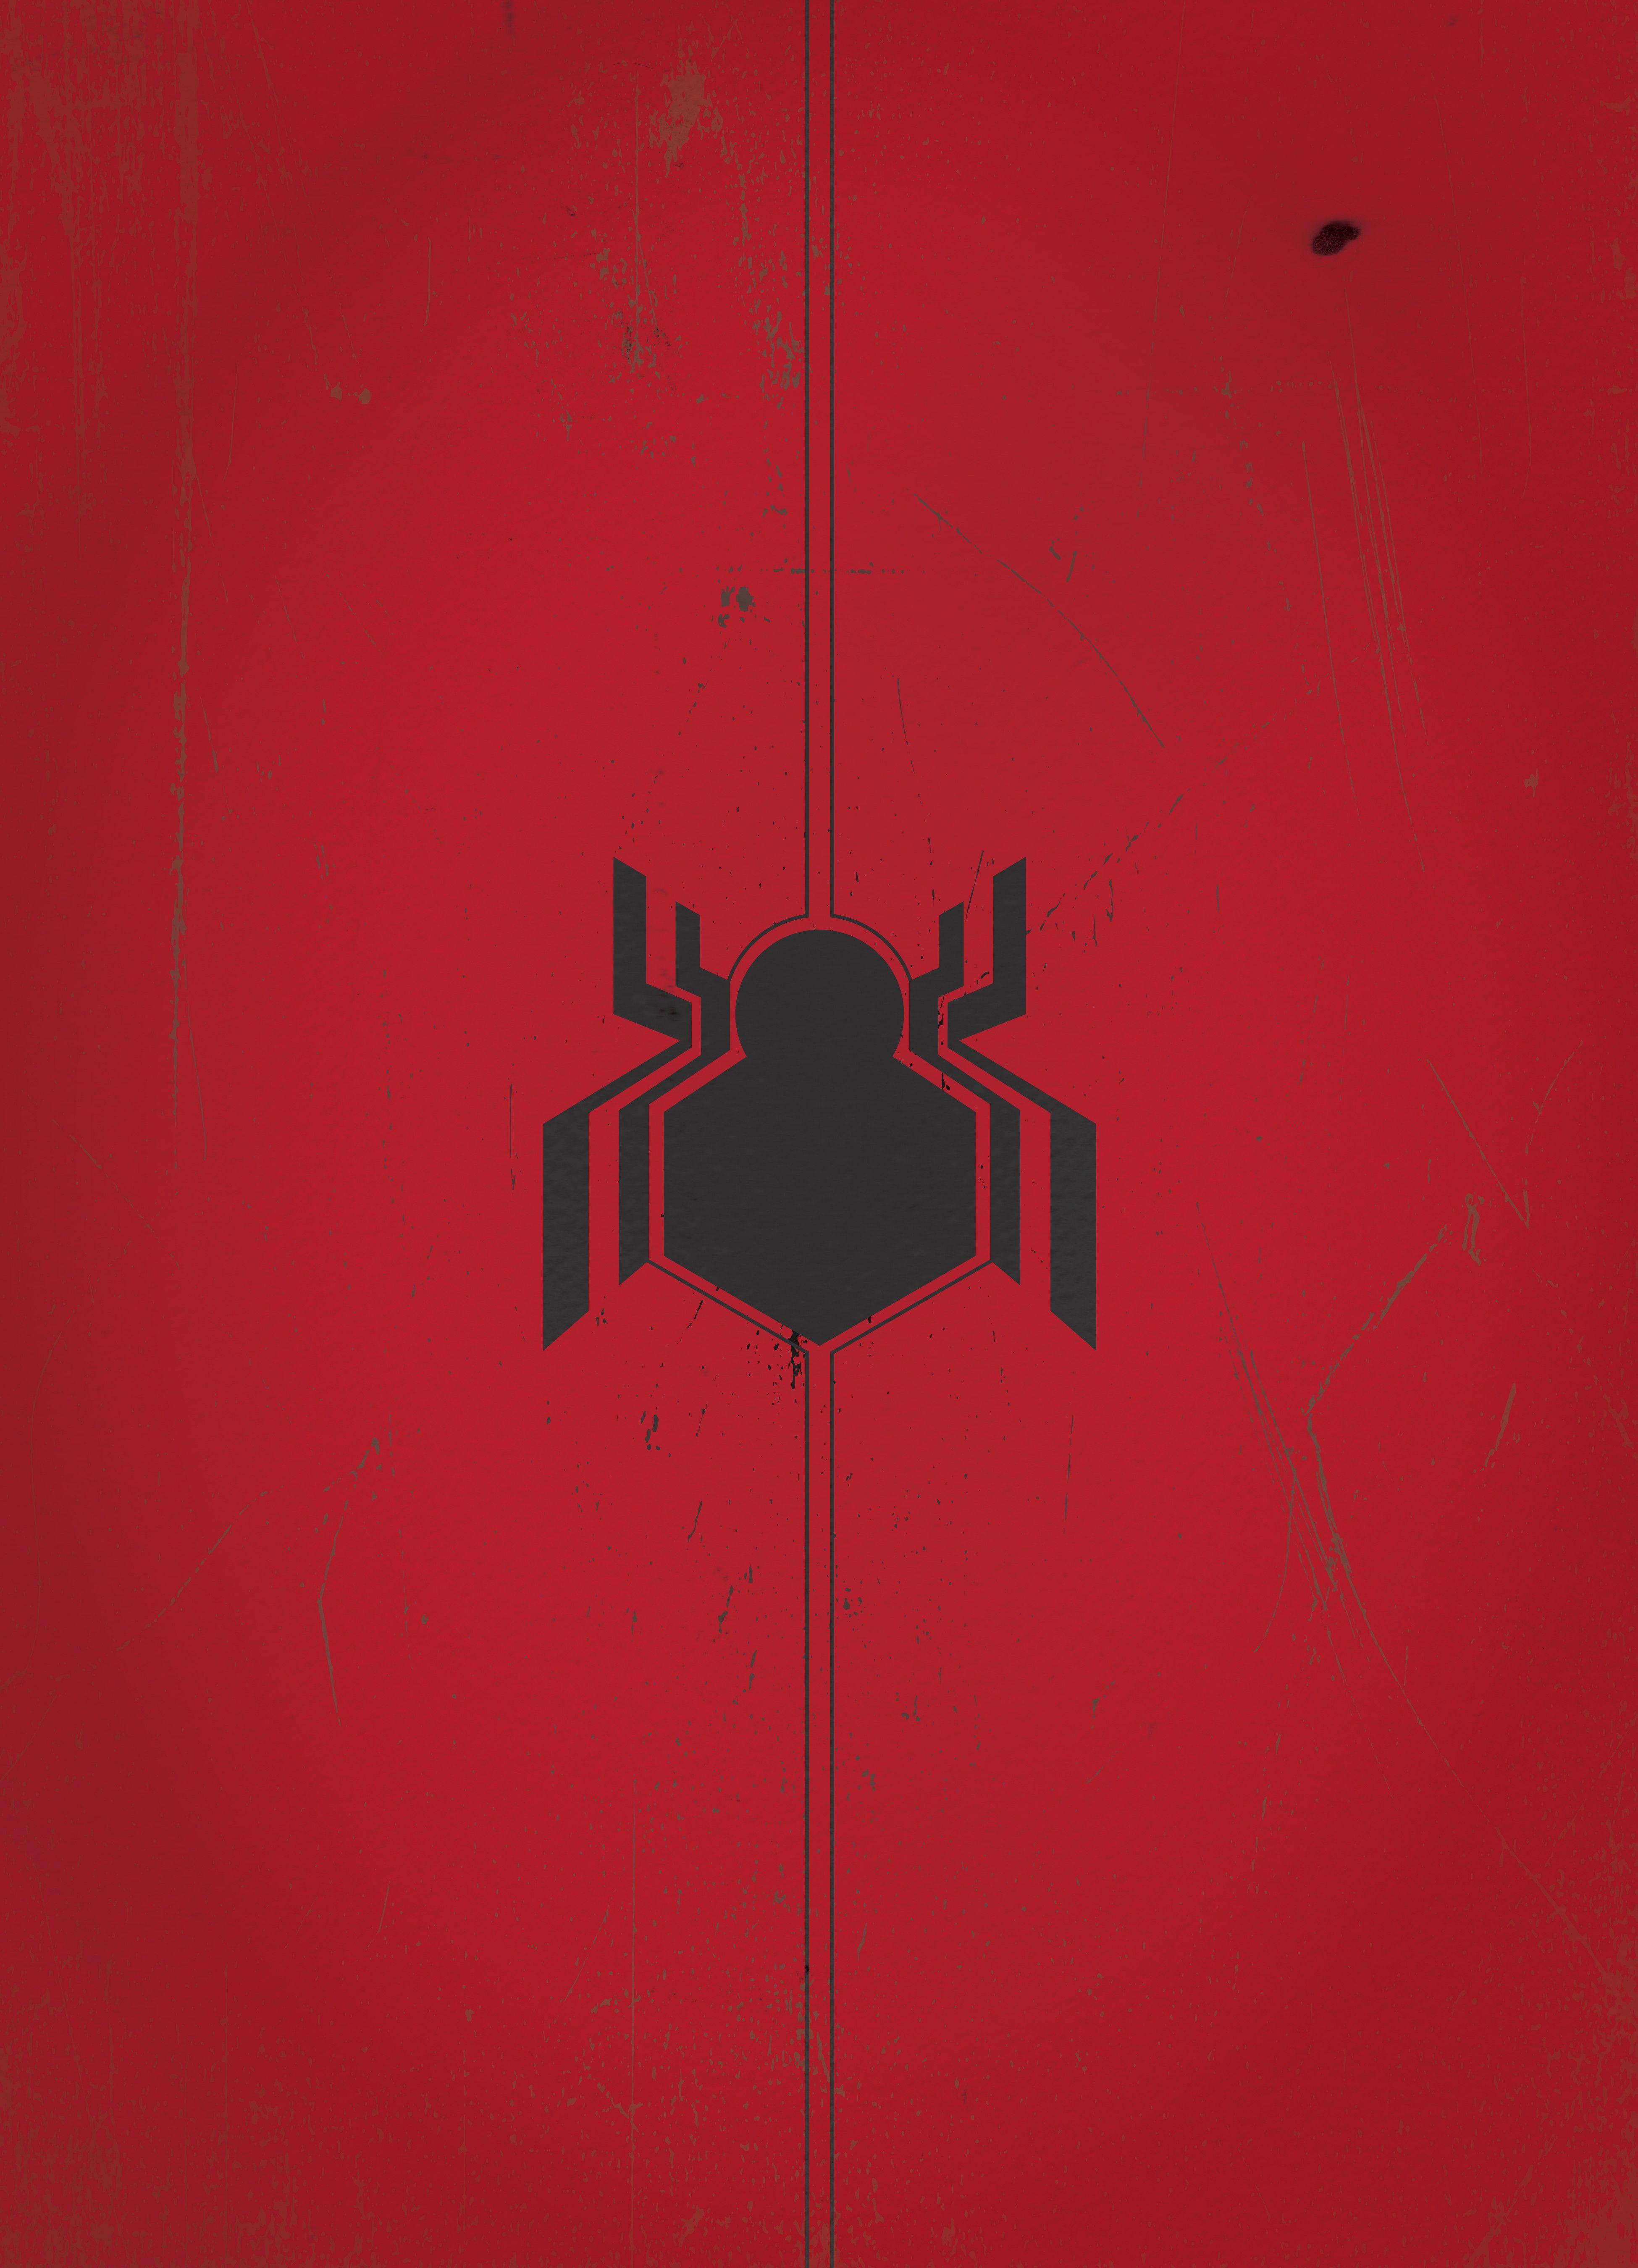 New Spider -Man Logo - I Went About Recreating The New Spider Man Logo From Civil War